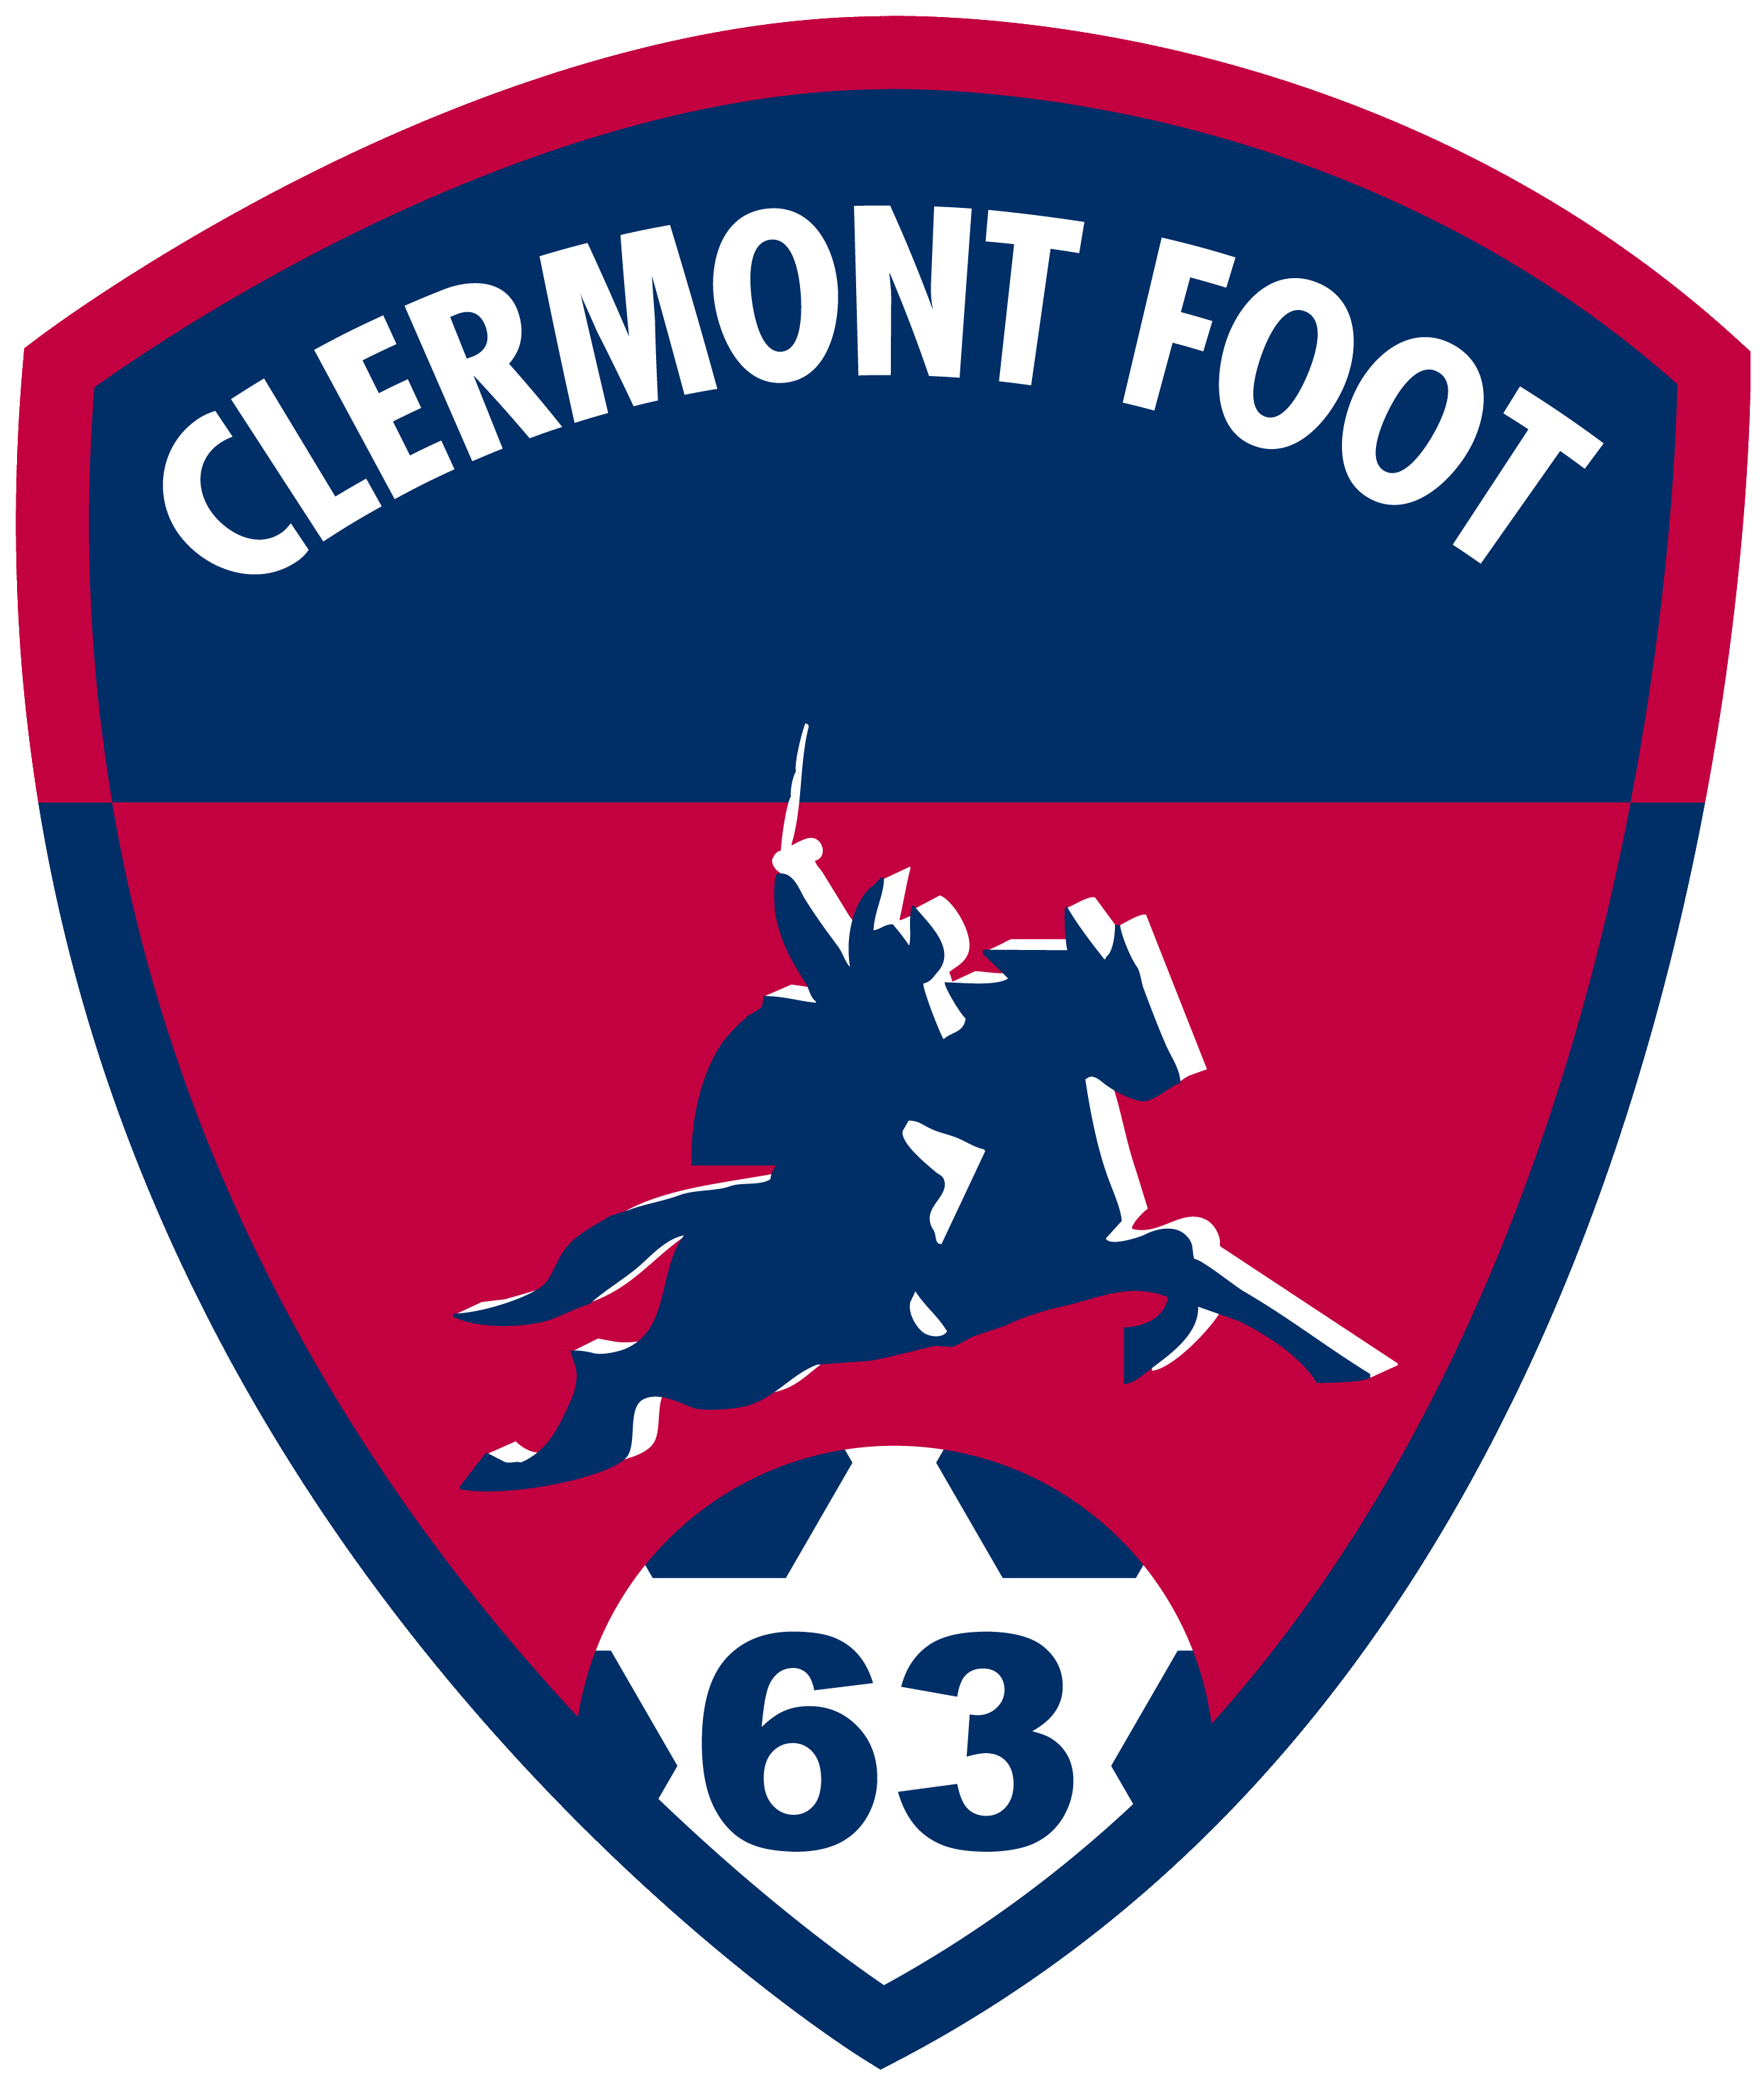 Clermont Foot vs Strasbourg: The guests look more reliable